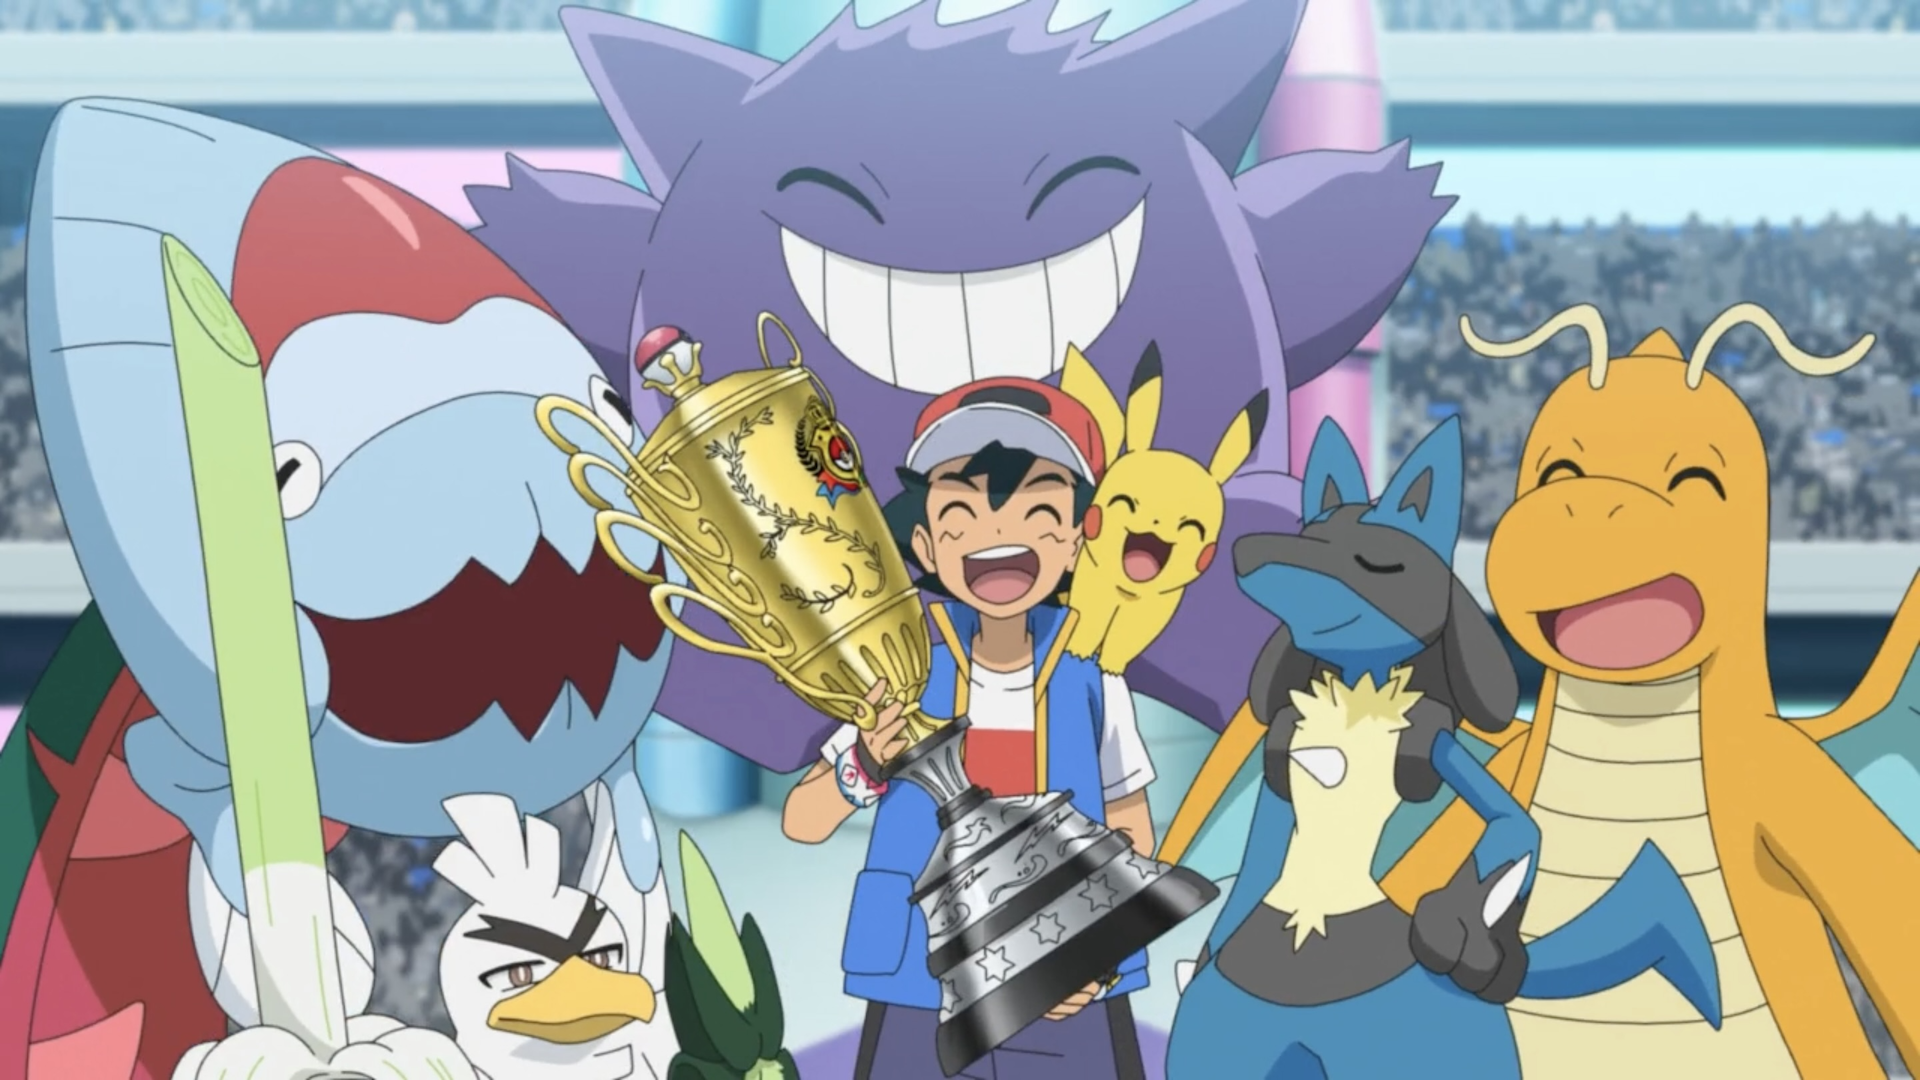 Pokemon Journeys Synopsis Forces Ash to Defend His Champion Title